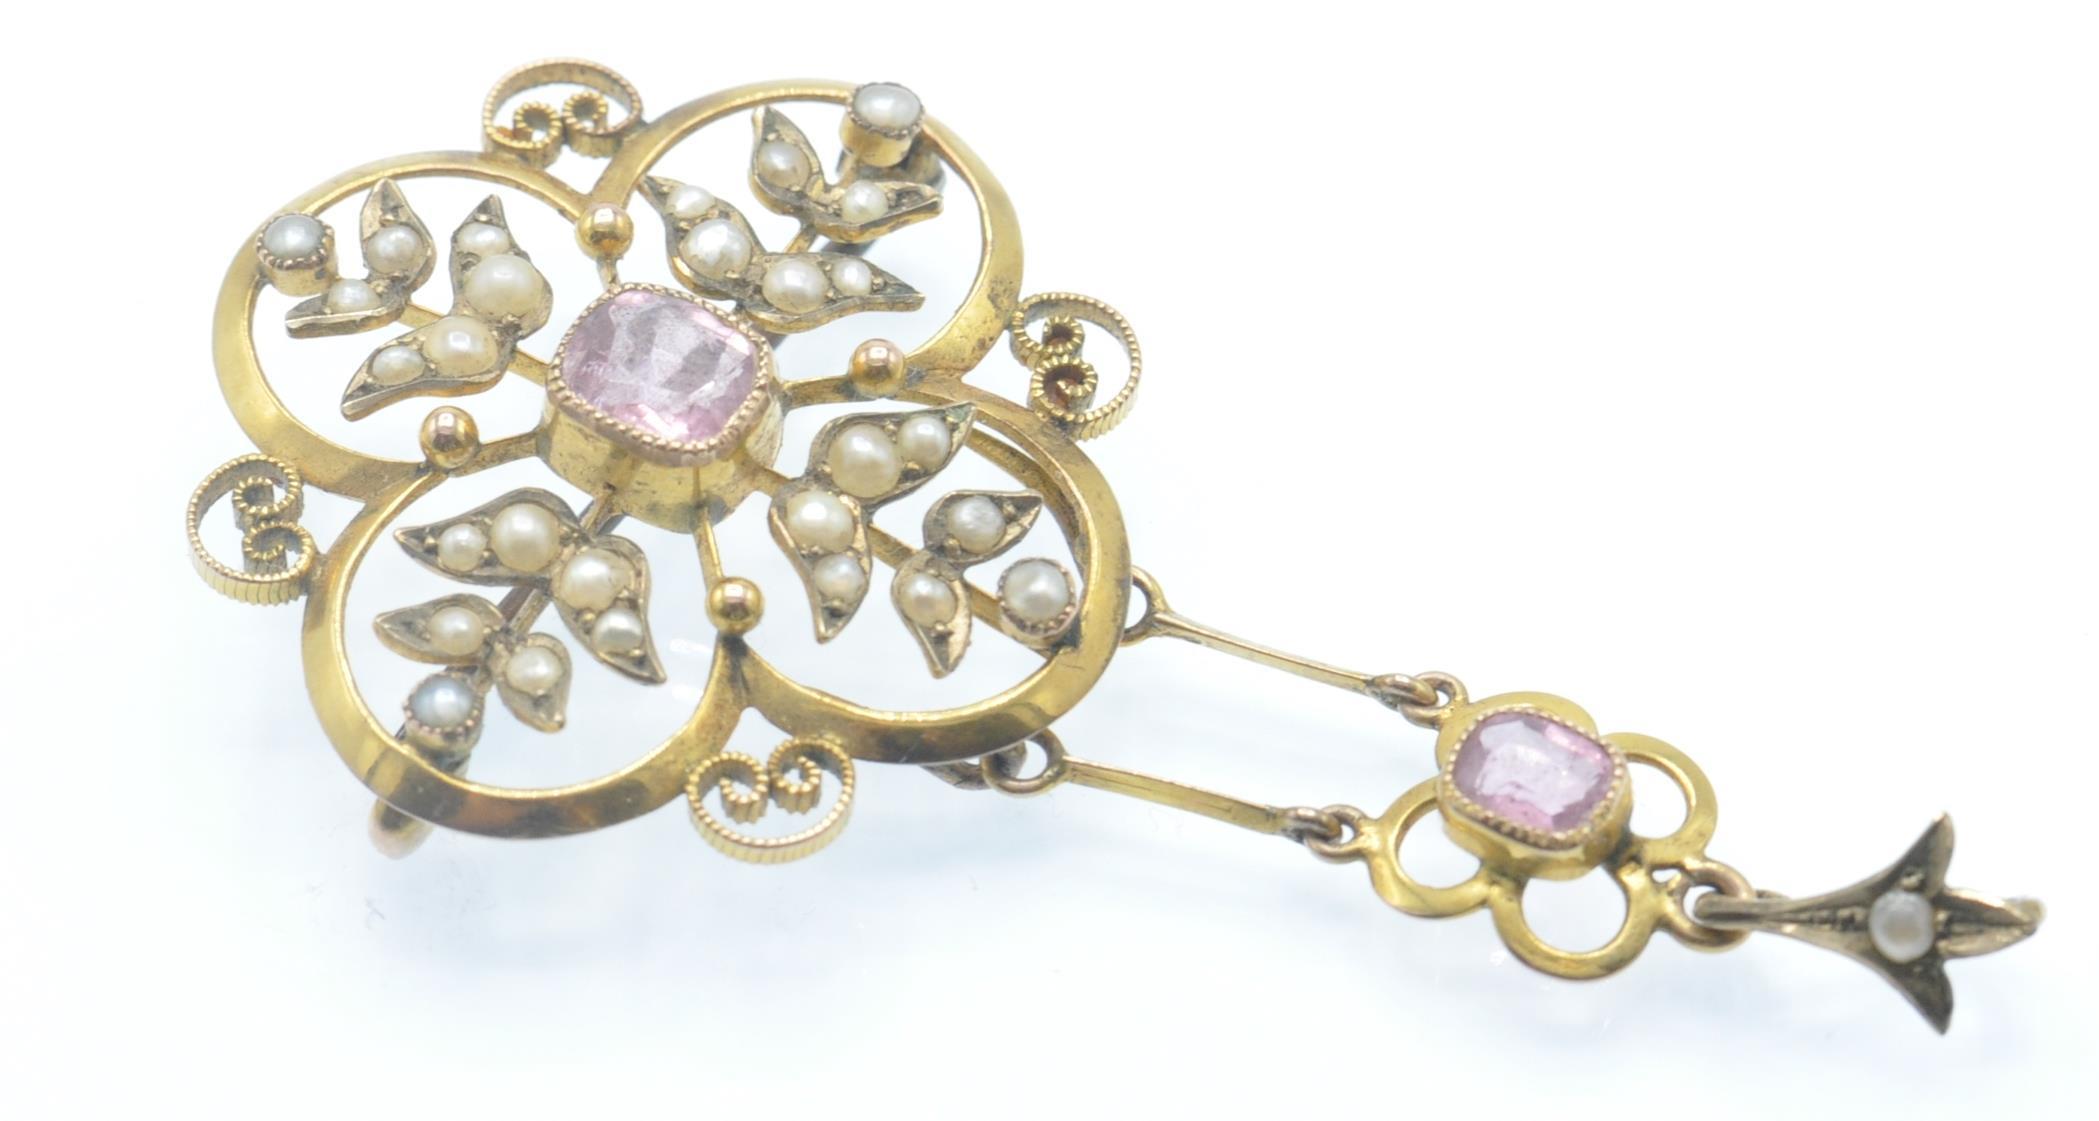 An Antique 9ct Gold Tourmaline & Seed Pearl Pendant Brooch